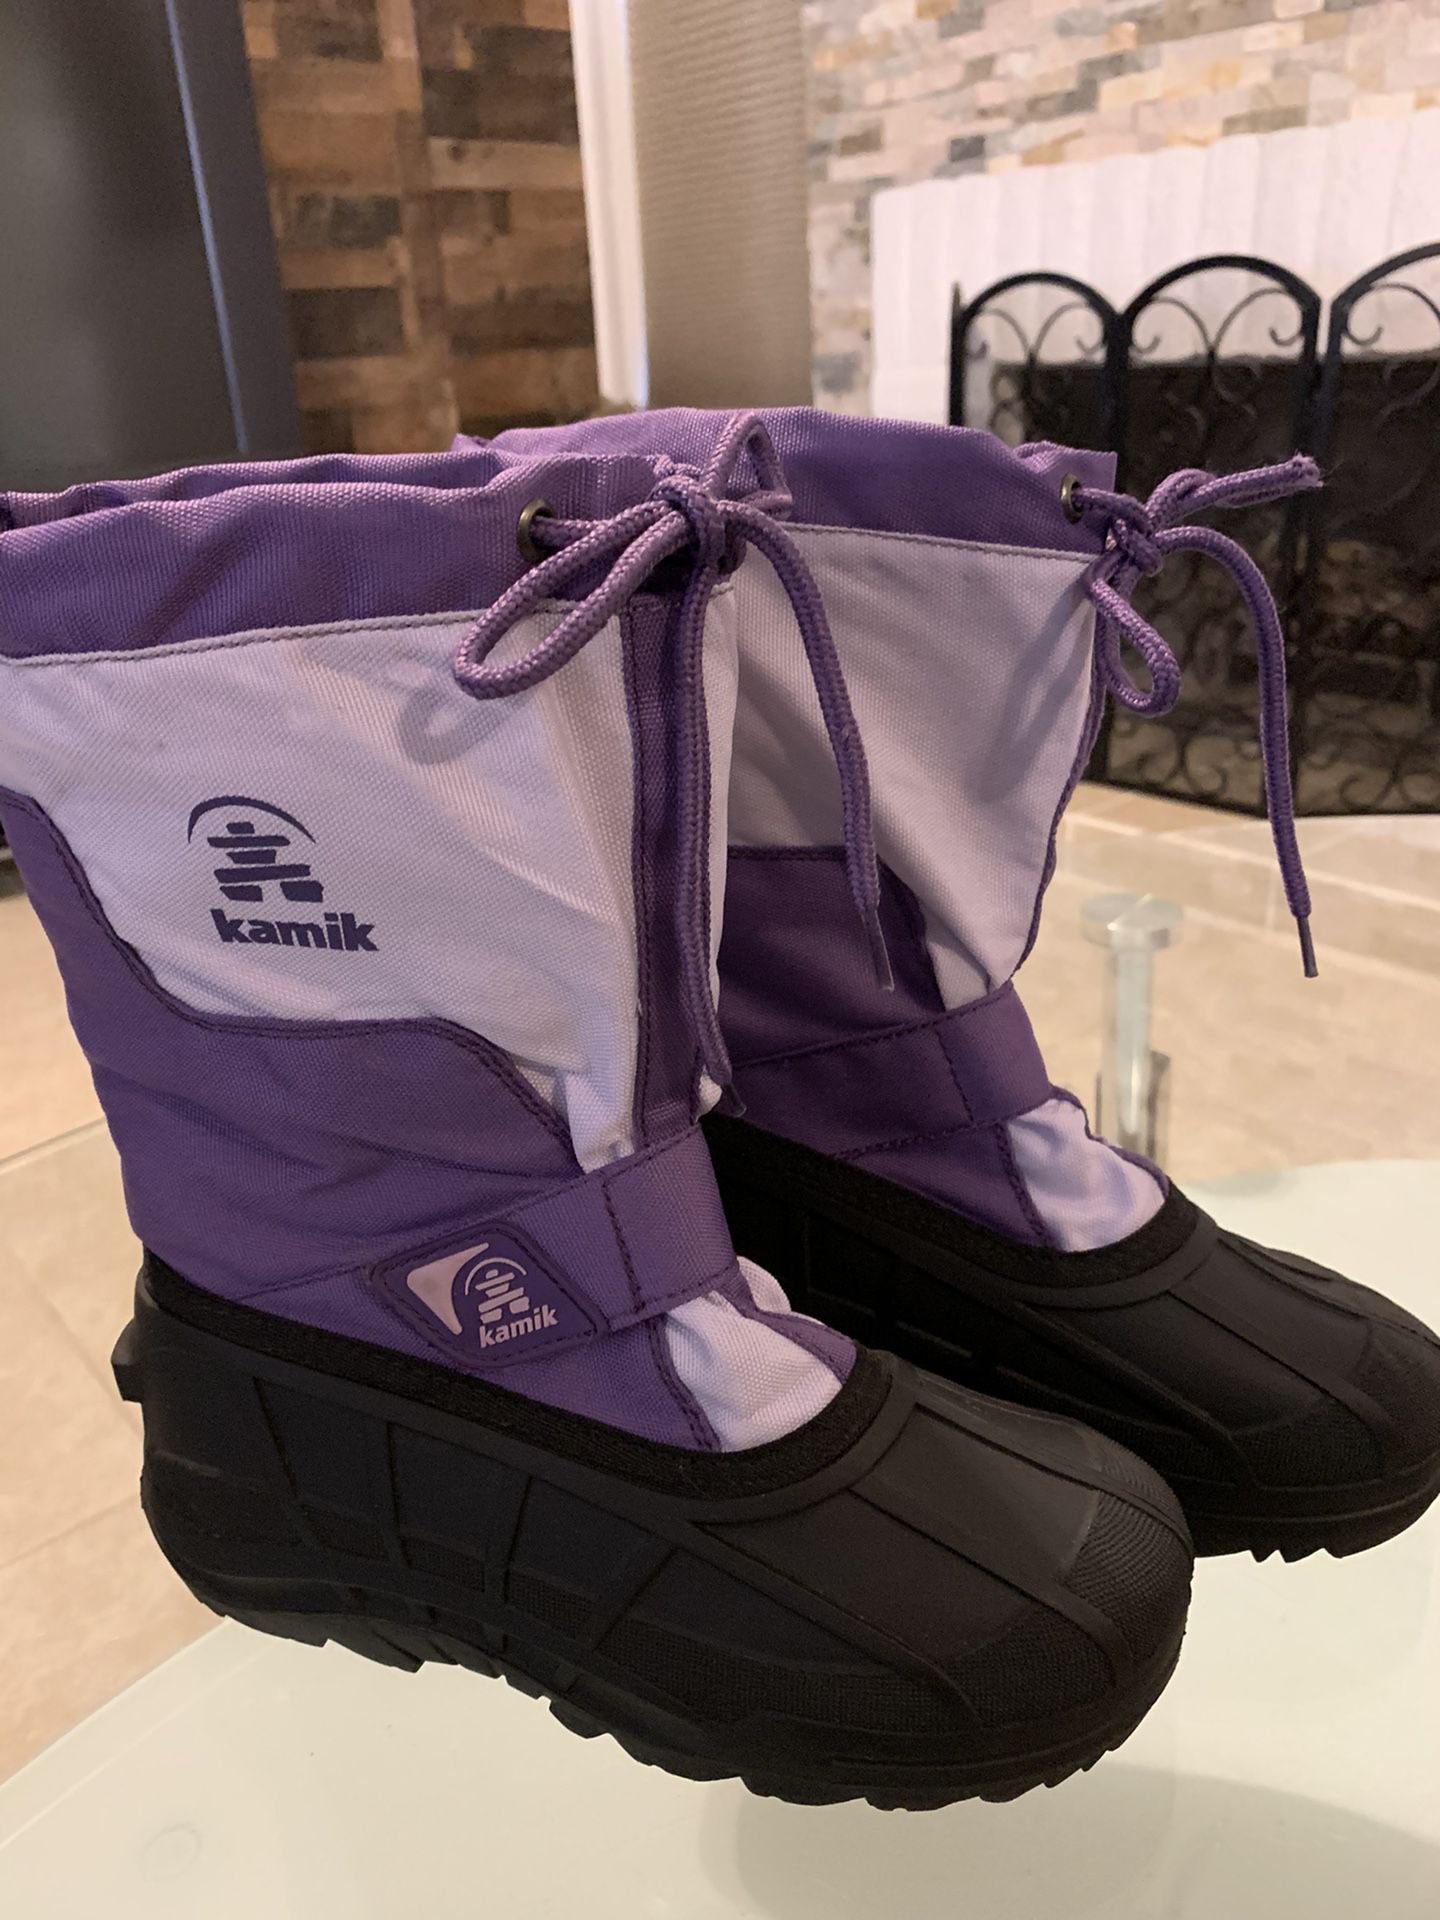 Girls size 4Y Kamik snow boots